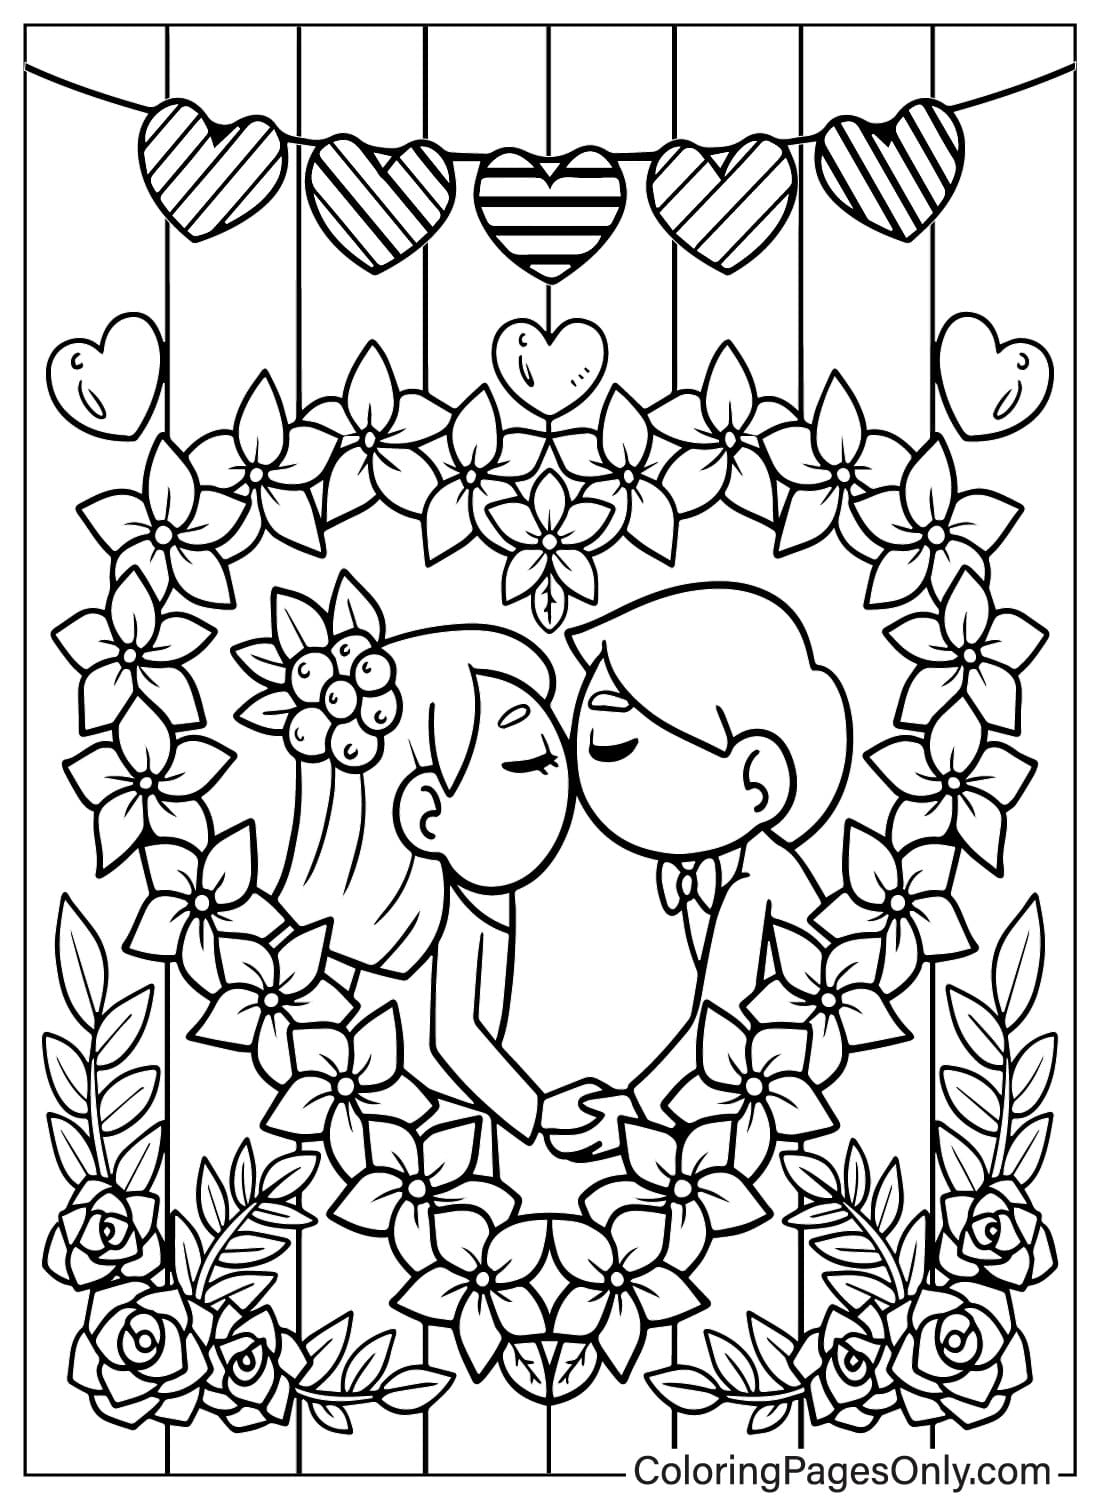 Printable Valentines Day Coloring Page